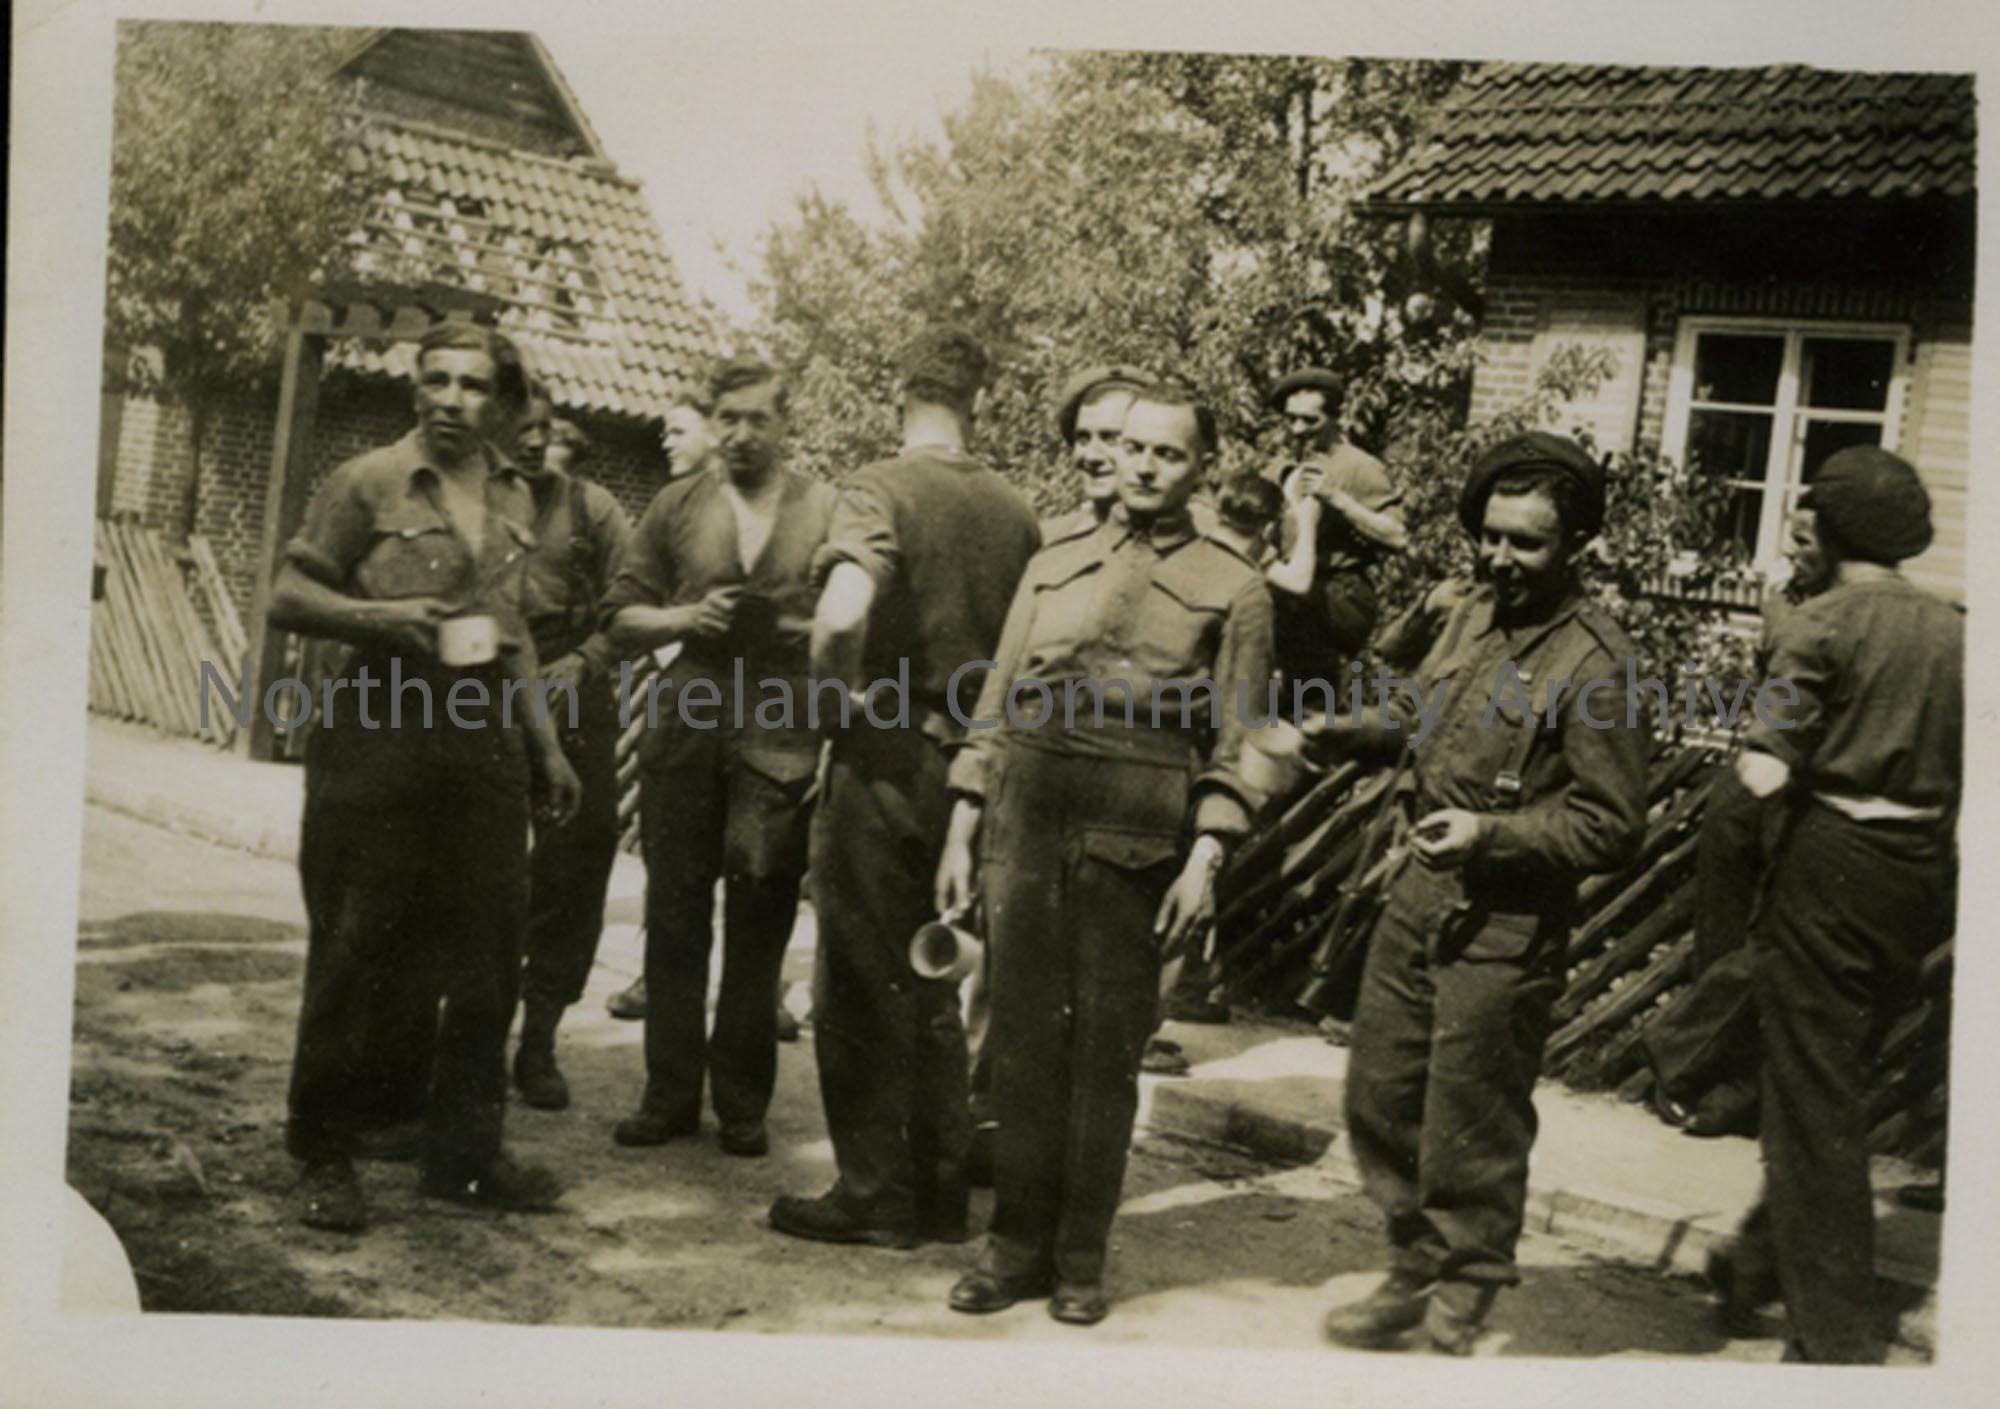 Group of soldiers in Damme Village Germany